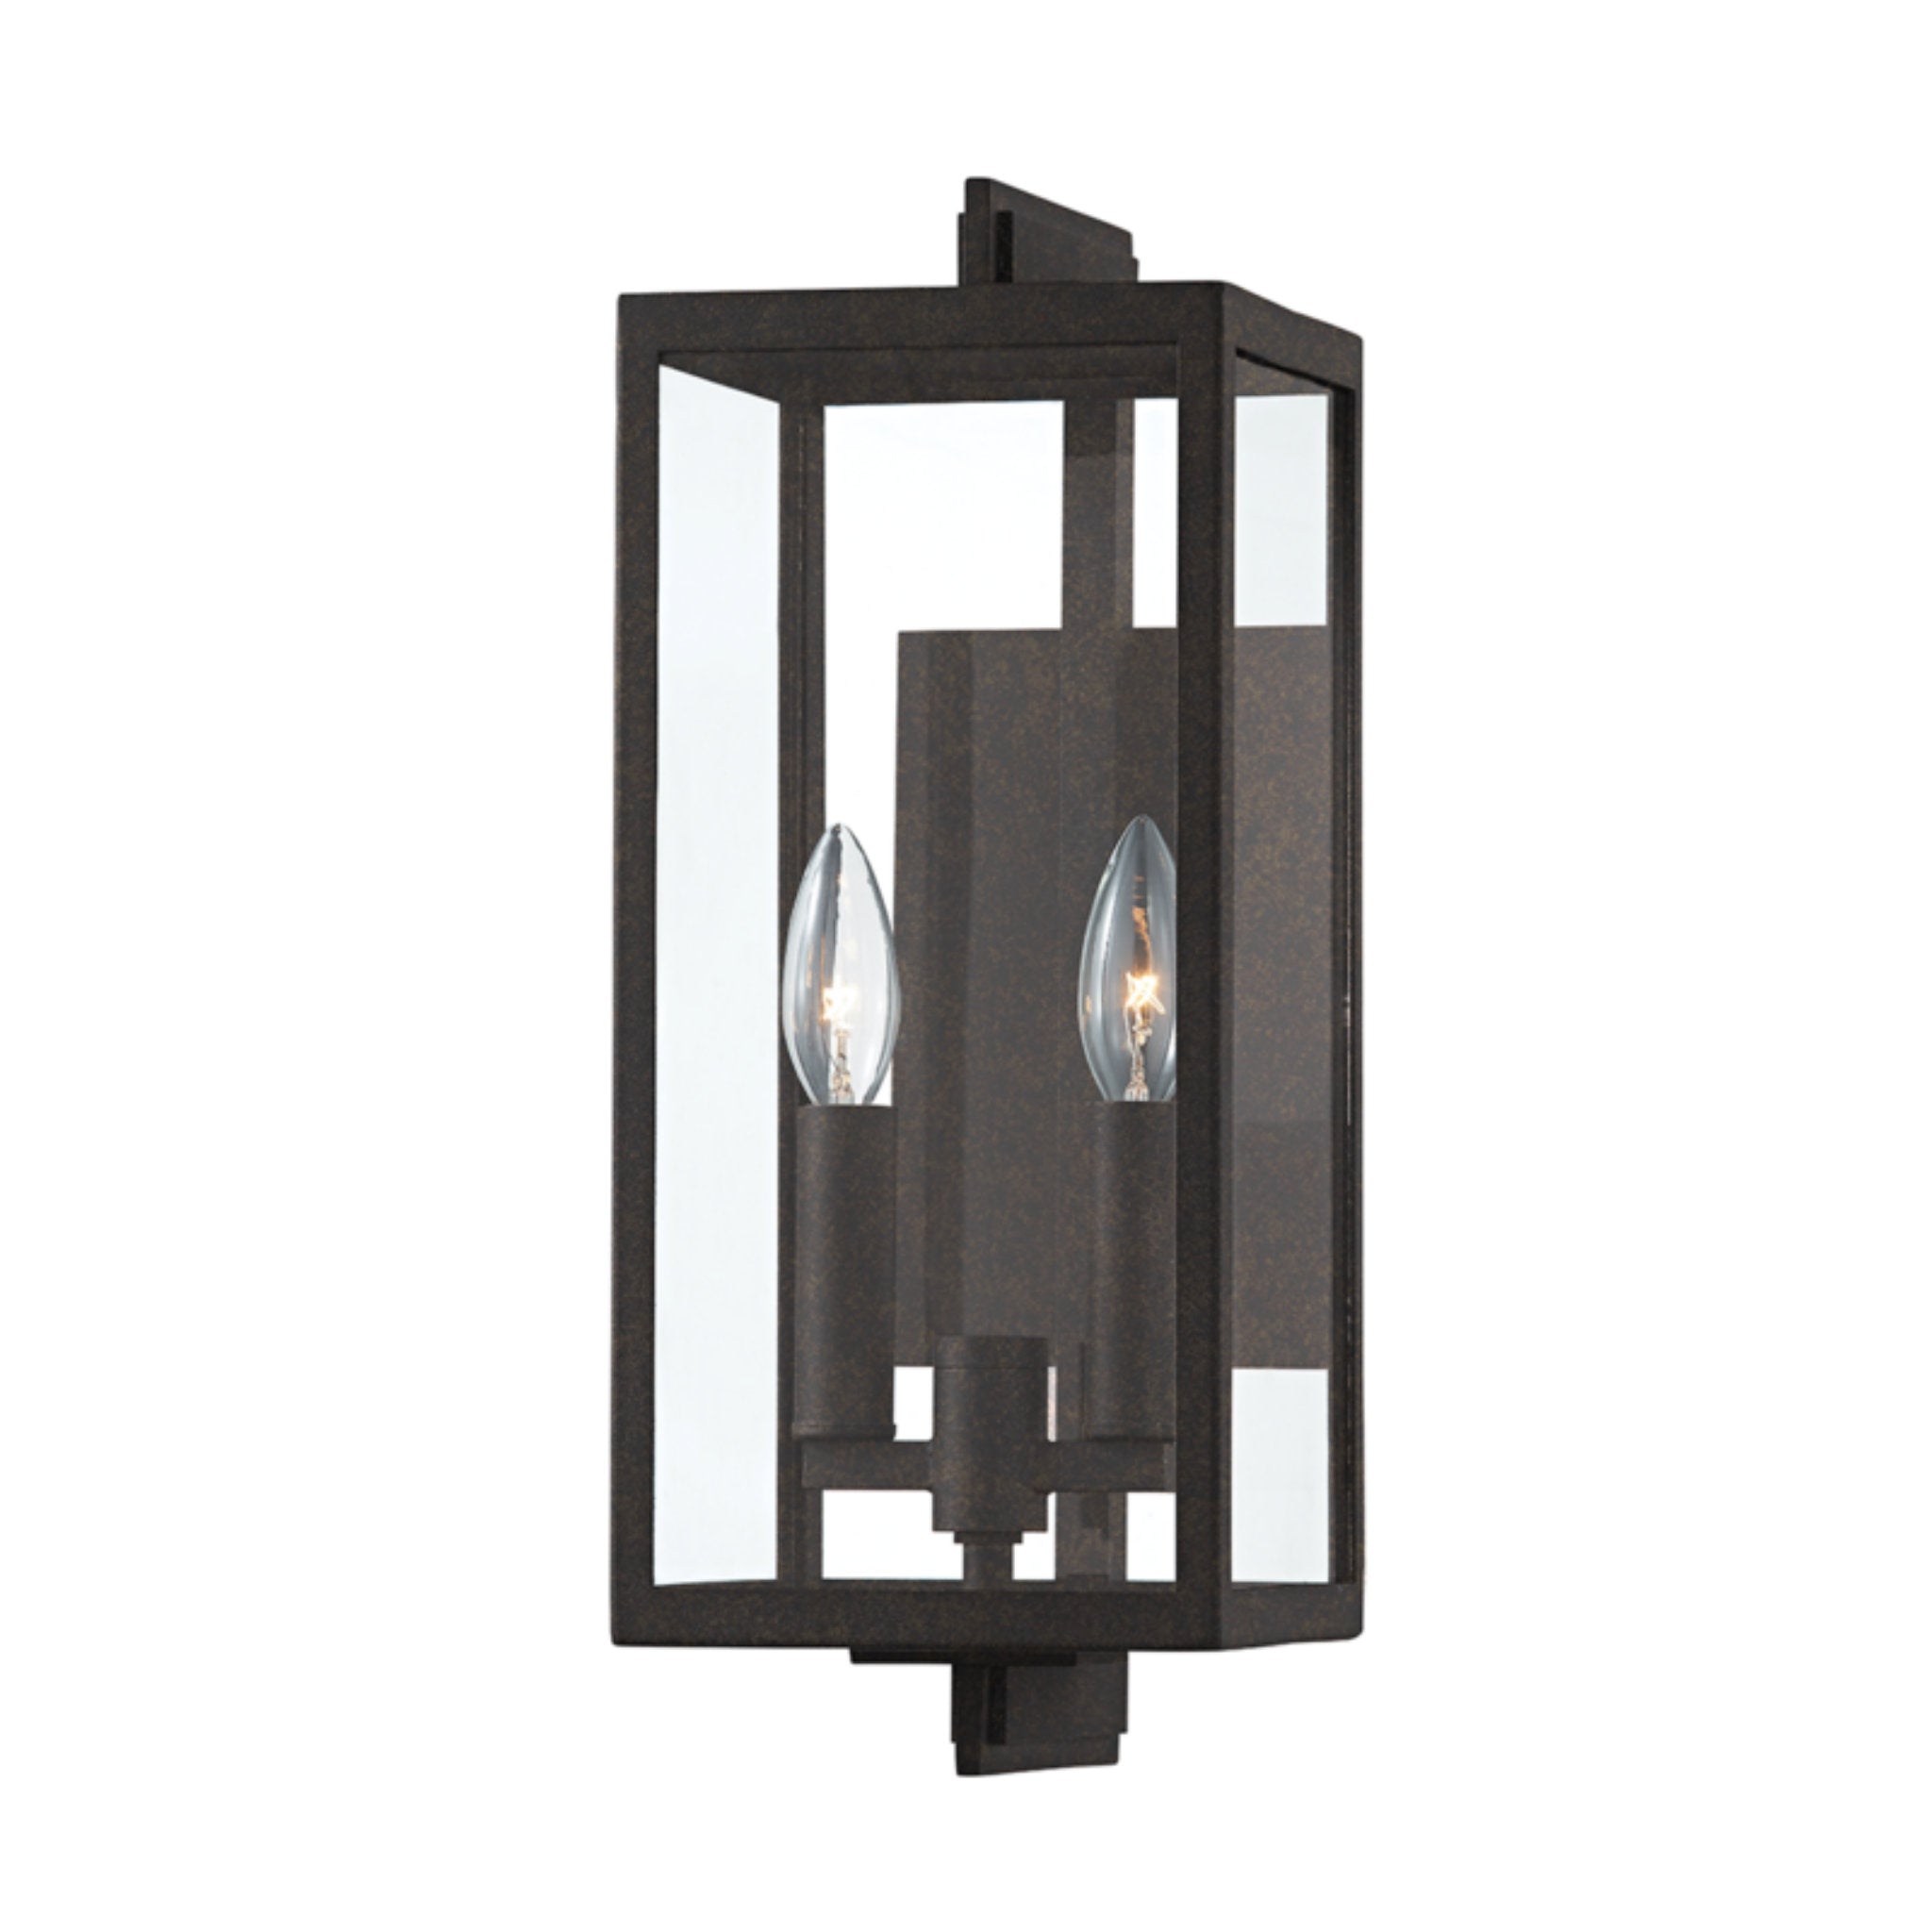 Nico 2 Light Wall Sconce in French Iron